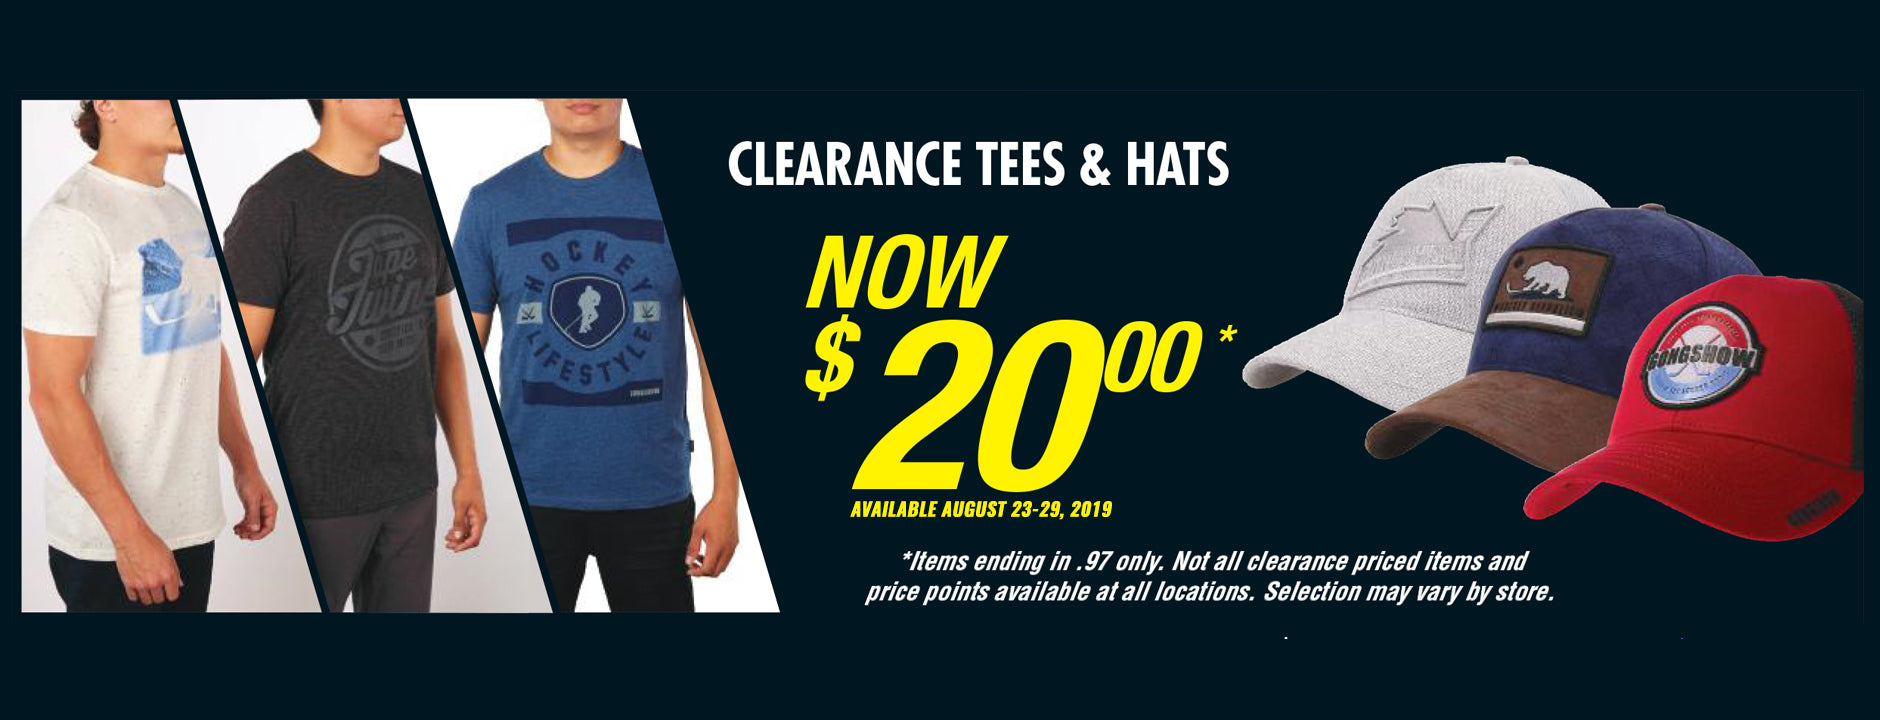 Gongshow Clearance T-Shirts & Hats